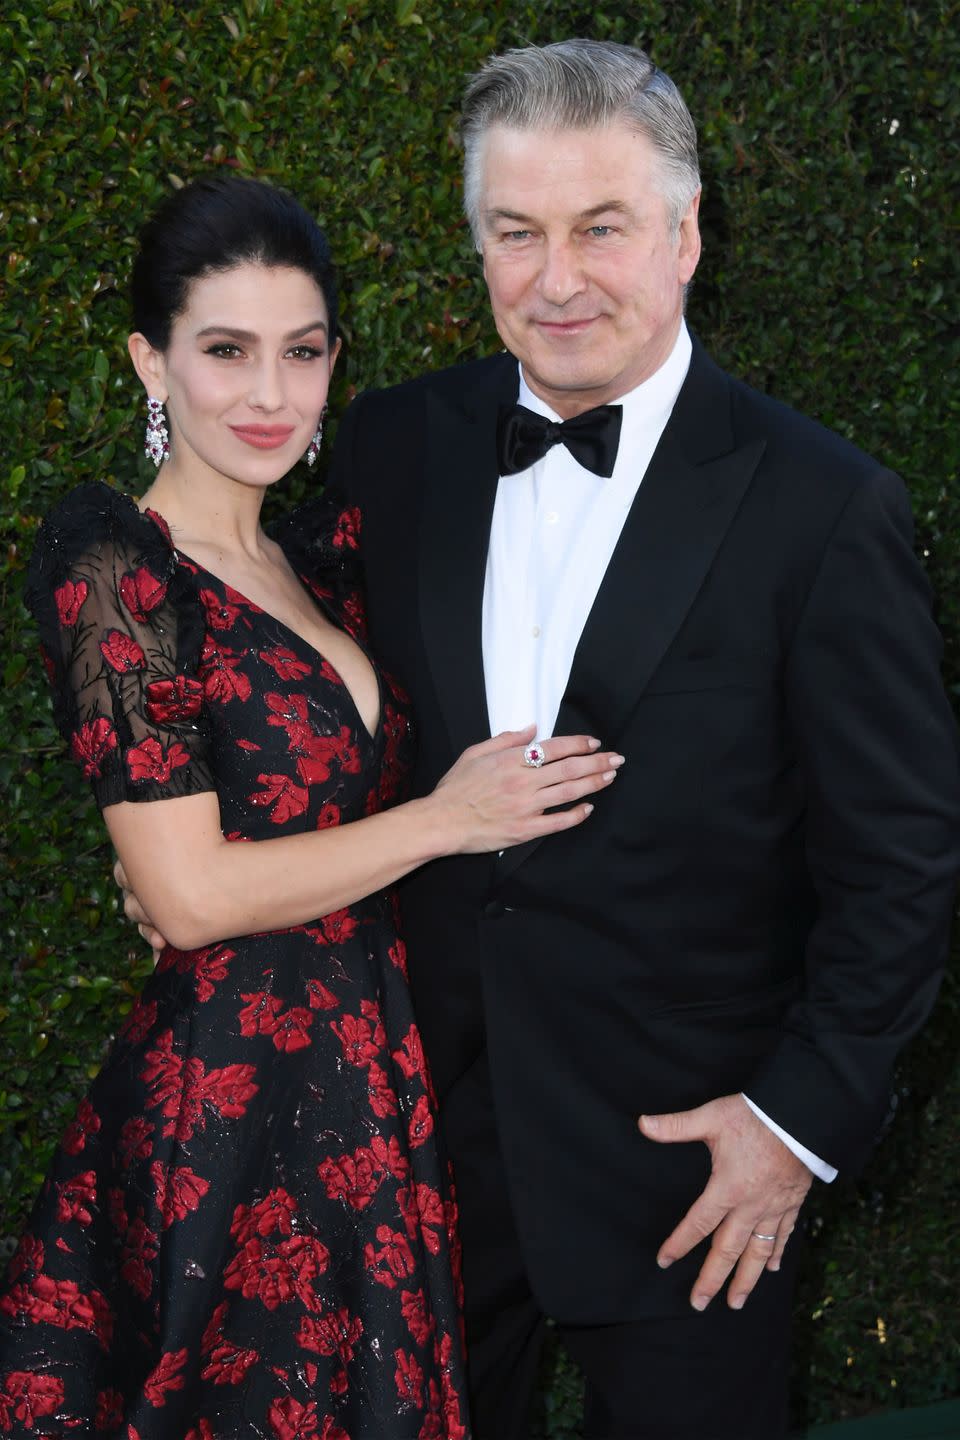 <p>Alec and Hilaria Baldwin met for the first time in February of 2011 when Hilaria was working as a yoga instructor. The couple moved quickly into a stable relationship as Hilaria told <em><a href="http://www.dailymail.co.uk/tvshowbiz/article-2478048/Hilaria-Baldwin-opens-early-courtship-husband-Alec-takes-photo-shoot-baby-Carmen.html">Beach magazine</a> </em>in a 2013 interview: “Five months into our relationship, we got an apartment together; then we started talking about getting married; then he proposed; then we got married; now we have a kid,” she explained. “So it all went quite fast!” The couple now shares four children together. </p>